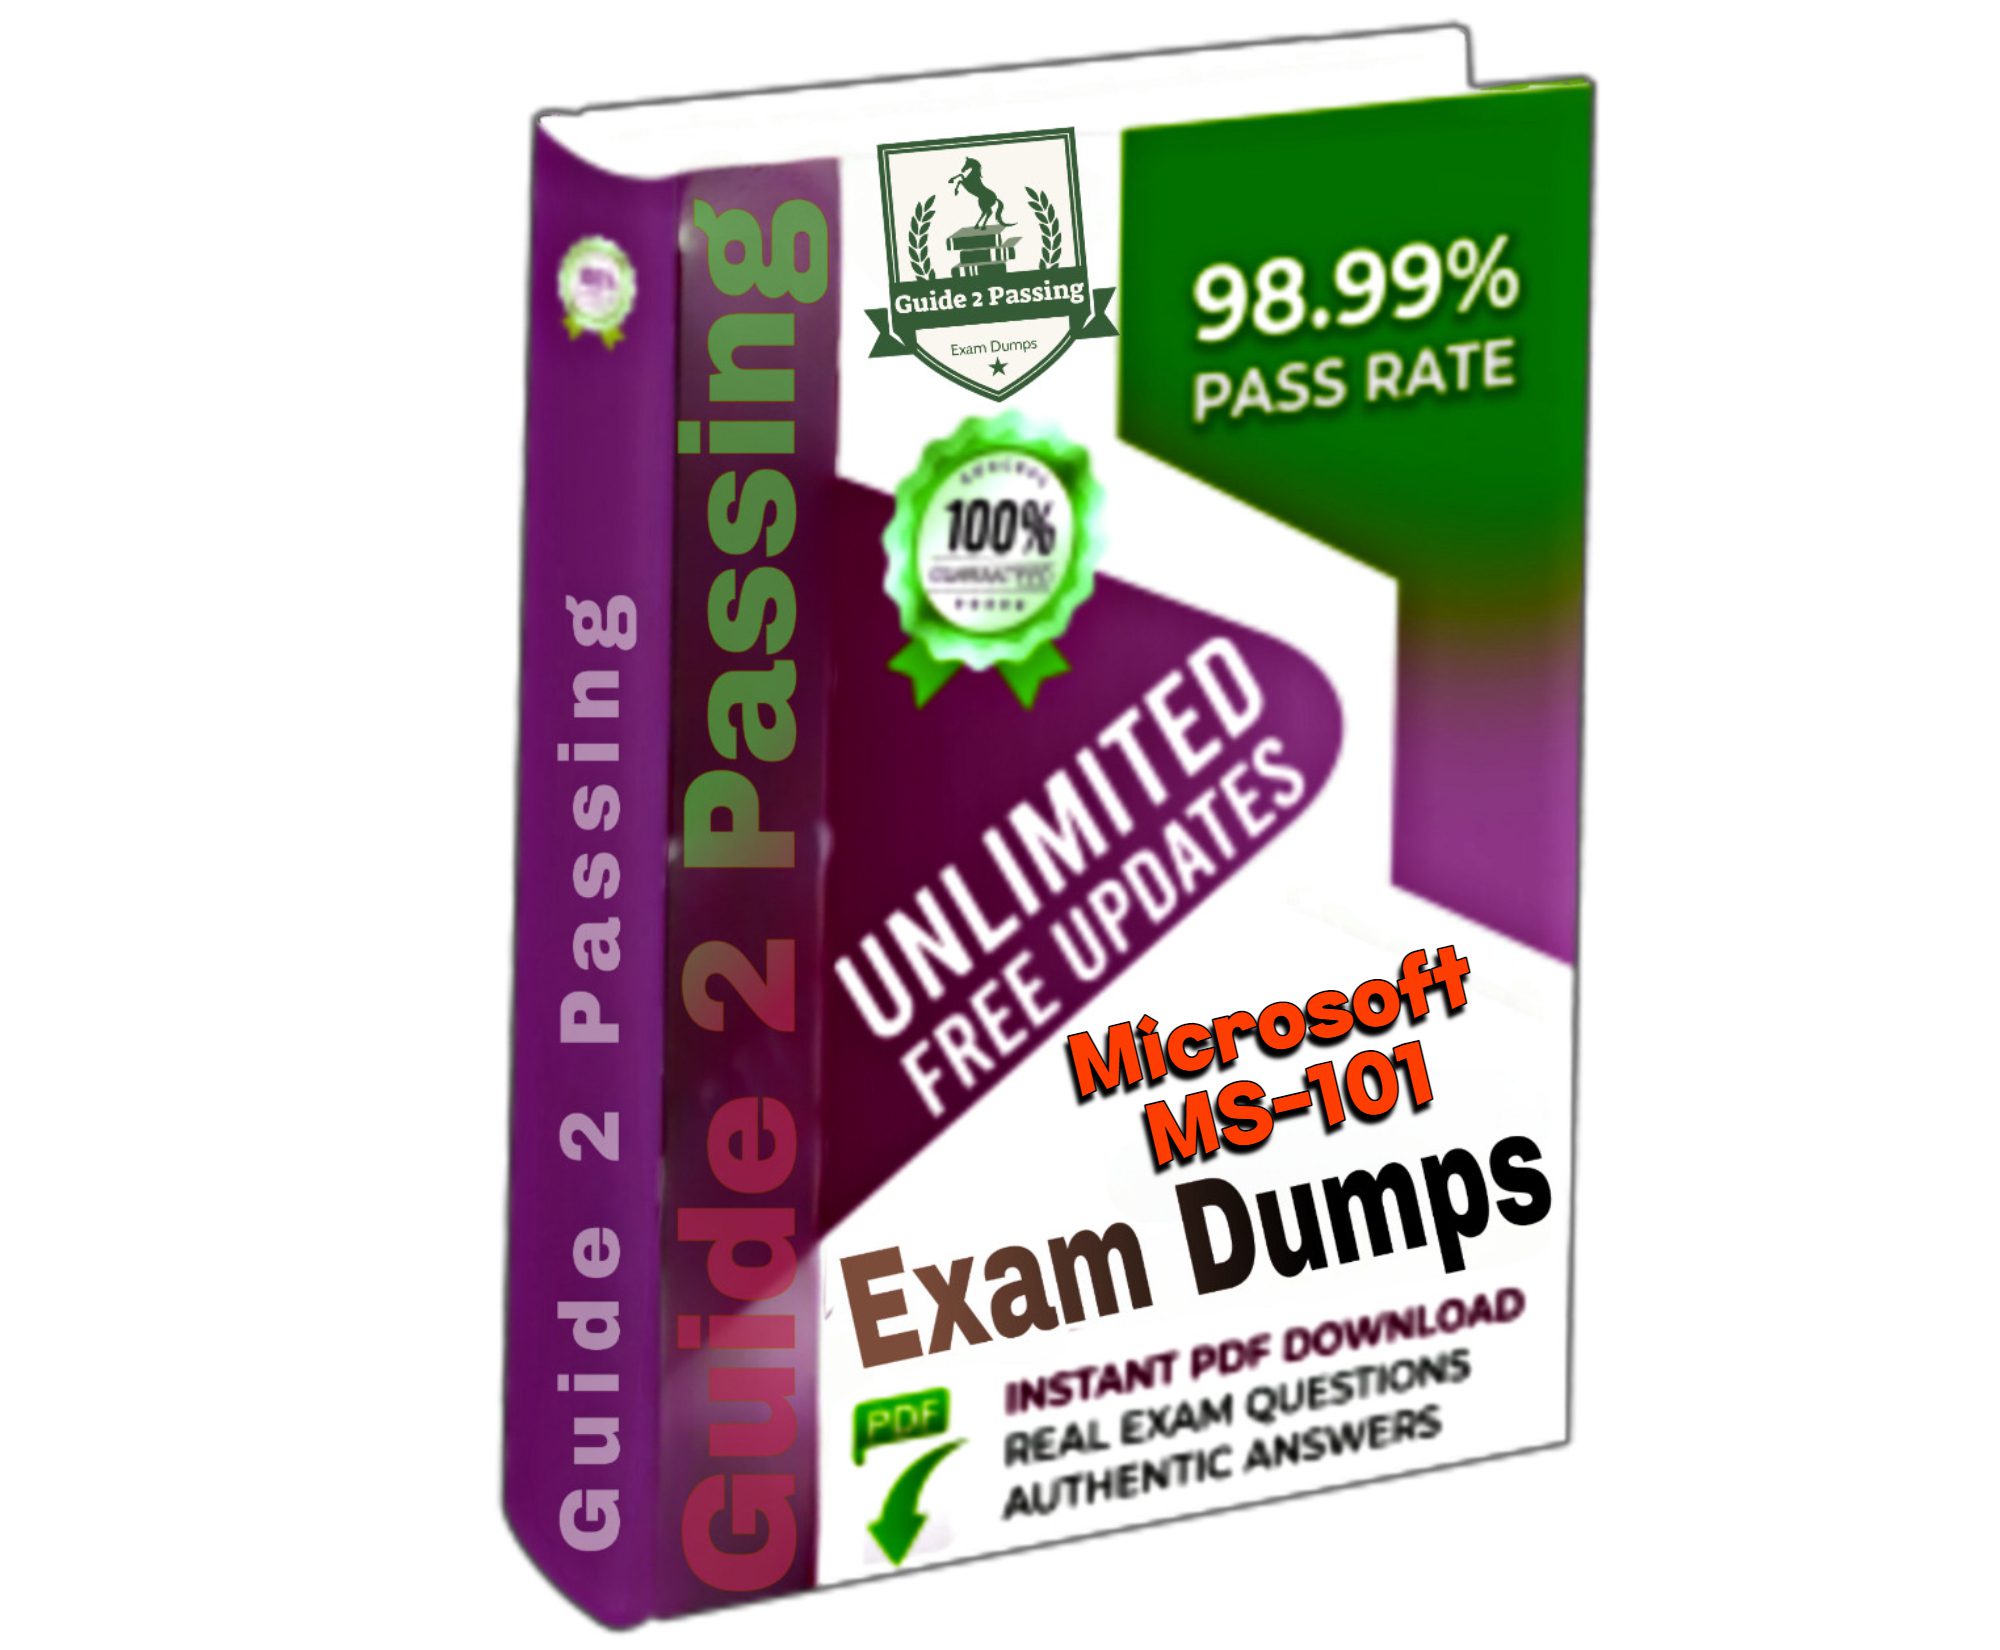 Pass Your Microsoft MS-101 Exam Dumps From Guide 2 Passing